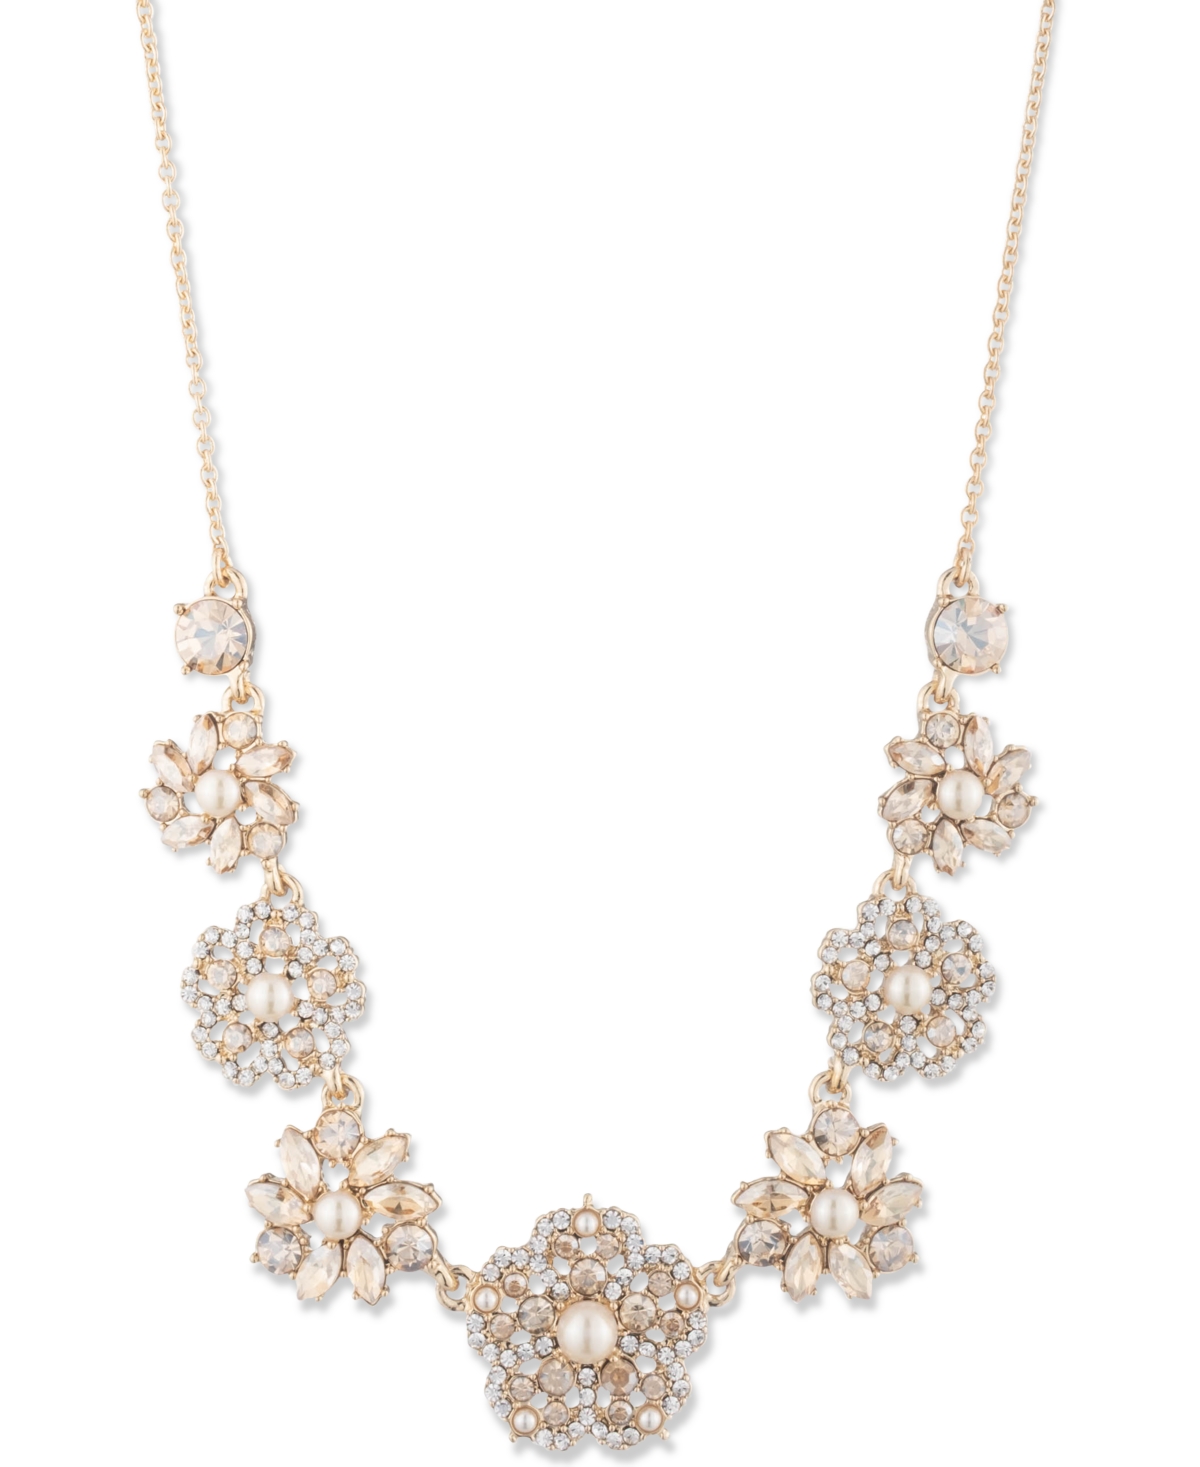 MARCHESA GOLD-TONE CRYSTAL & IMITATION PEARL FLOWER STATEMENT NECKLACE, 16" + 3" EXTENDER